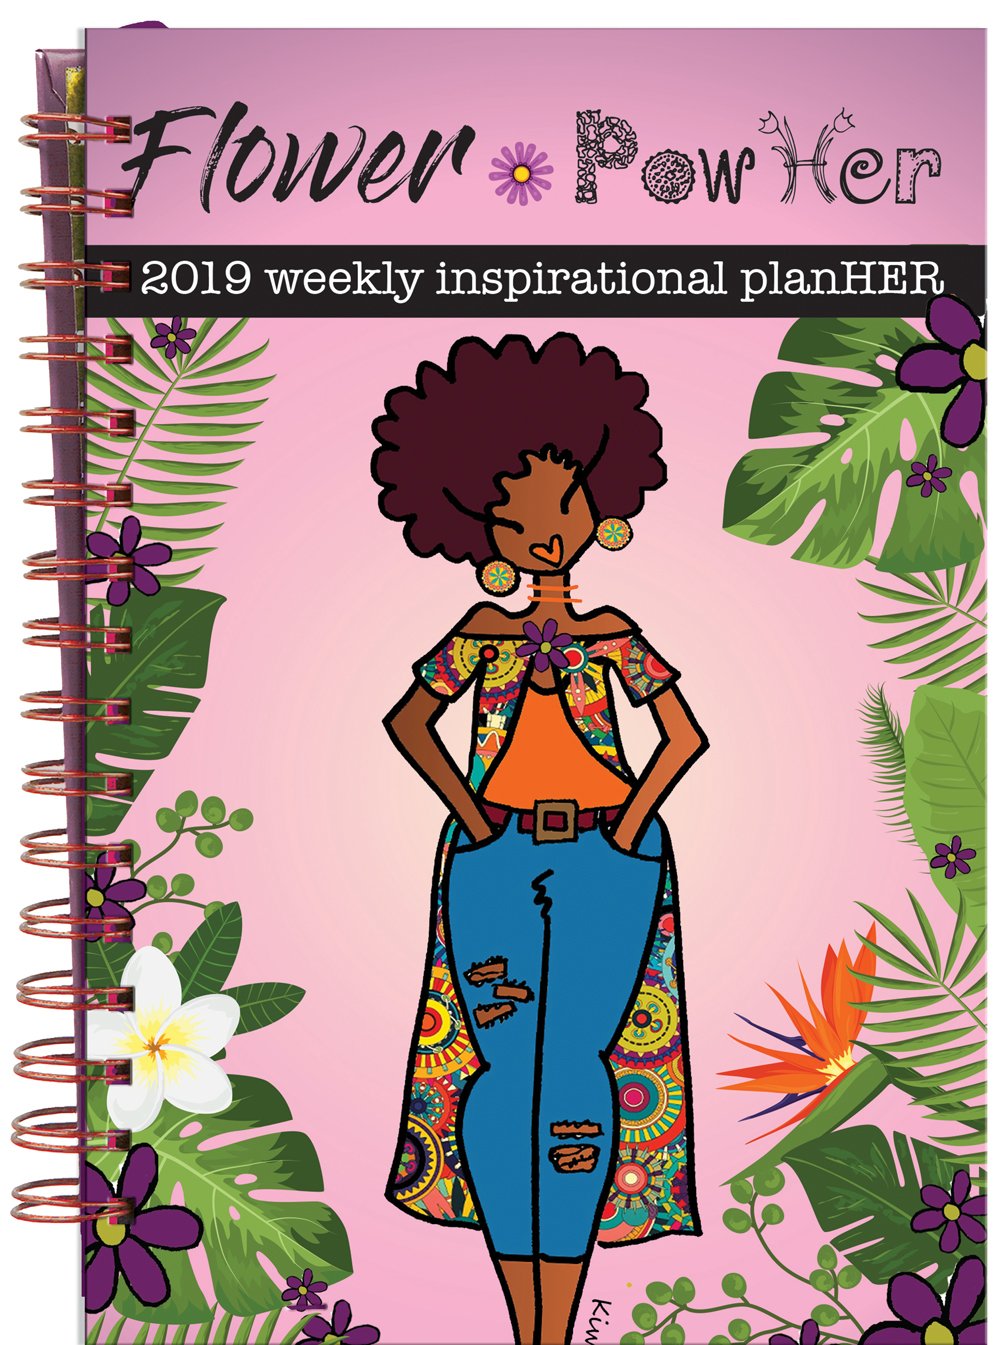 Flower PowHer-Weekly Planner-Kiwi McDowell-11.5x8.75 inches-2019 Weekly-The Black Art Depot